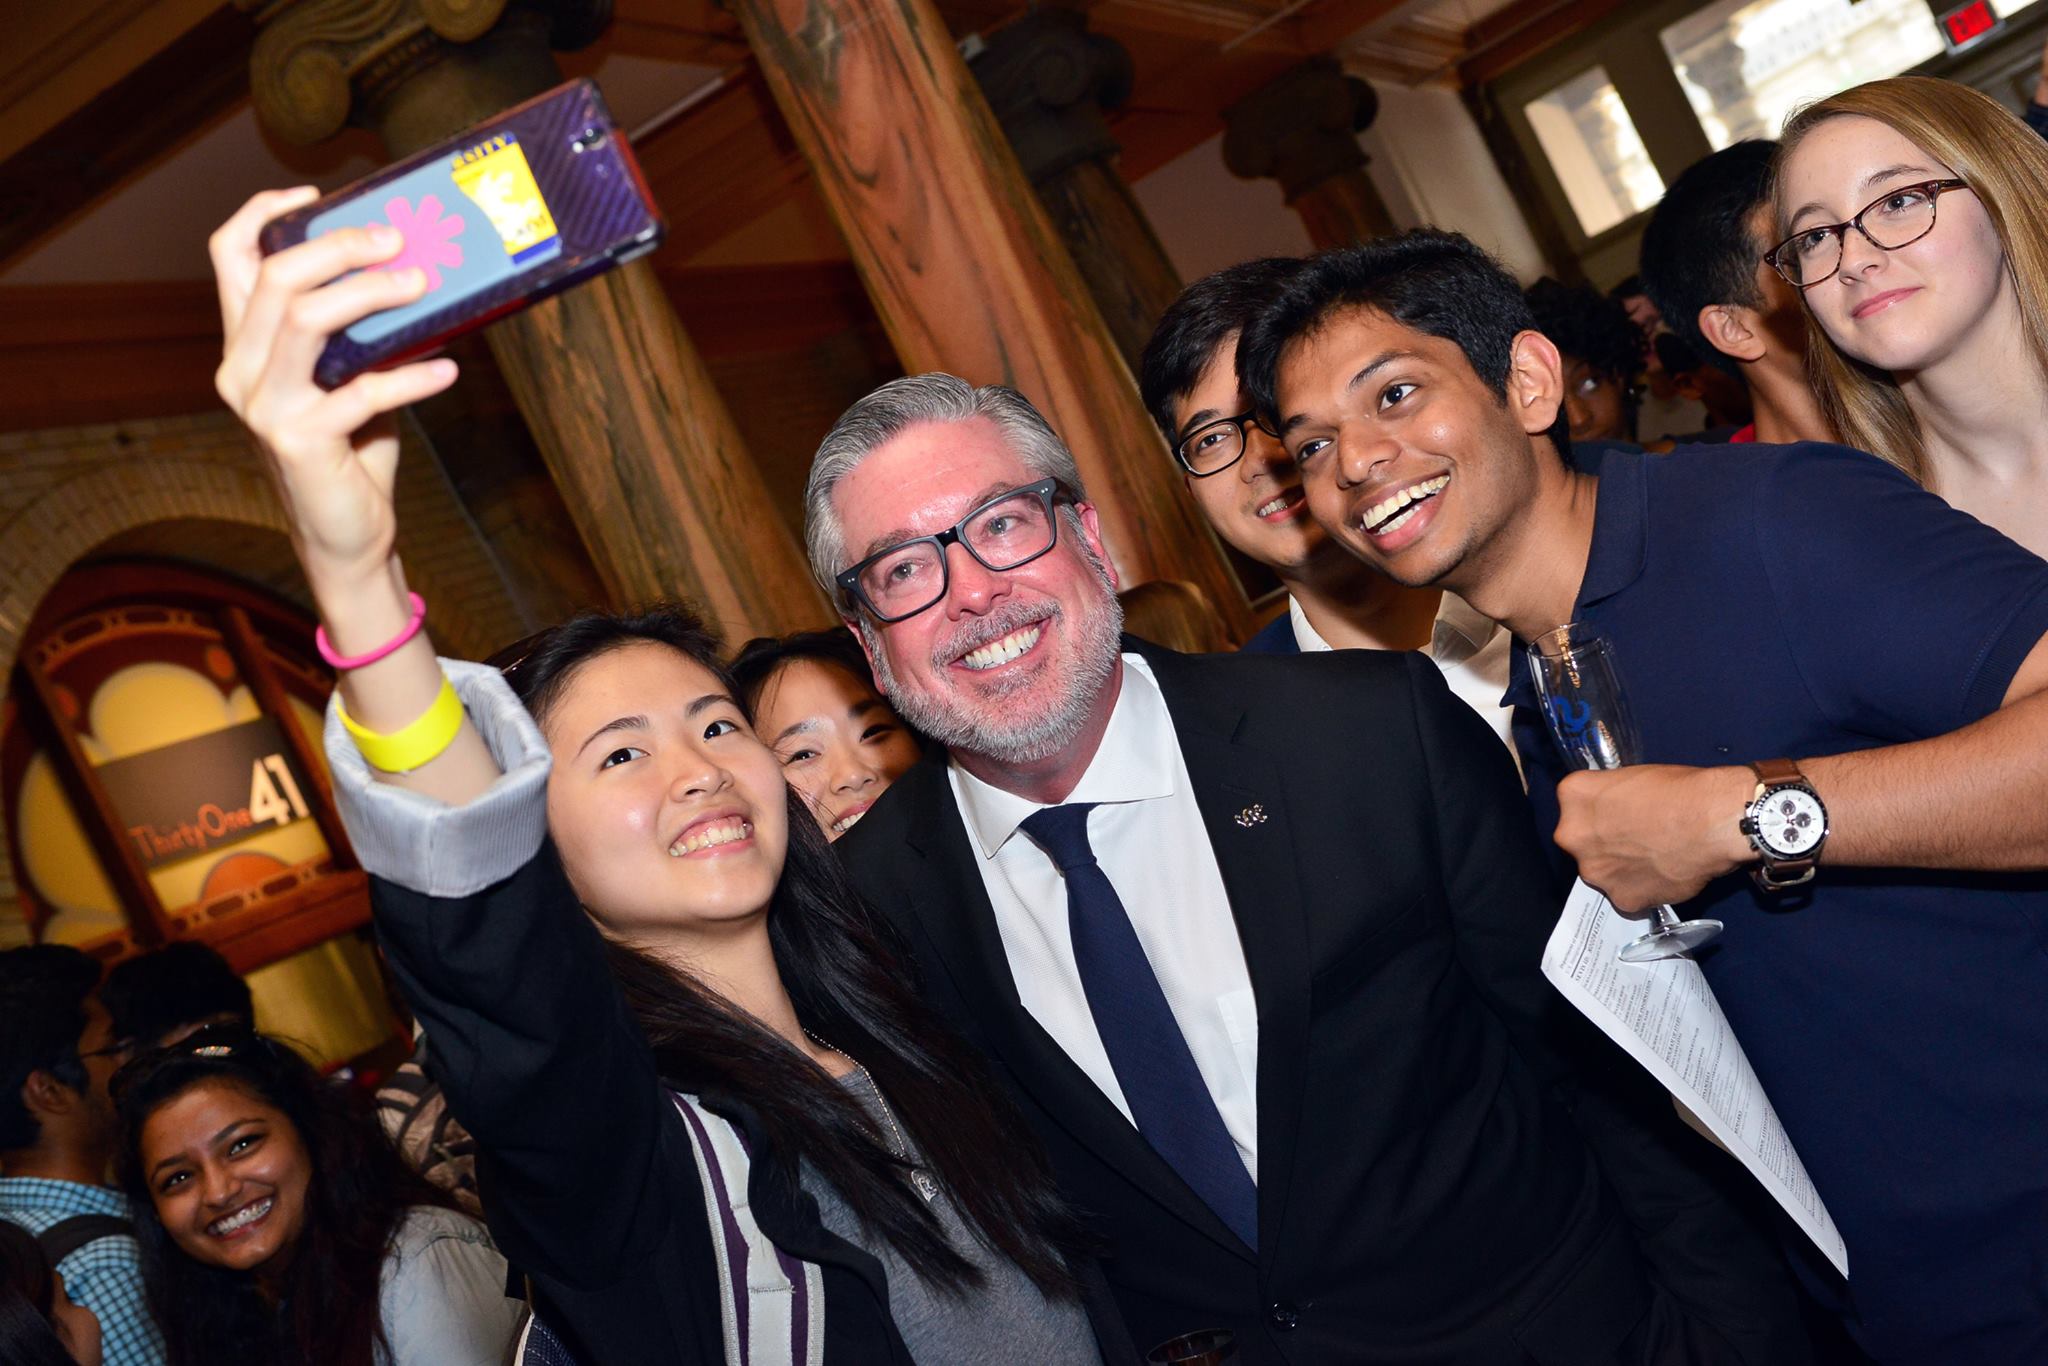 A different angle of President John Fry taking a group selfie with graduating seniors at the Senior Toast event which was held in the lobby of Main Building.